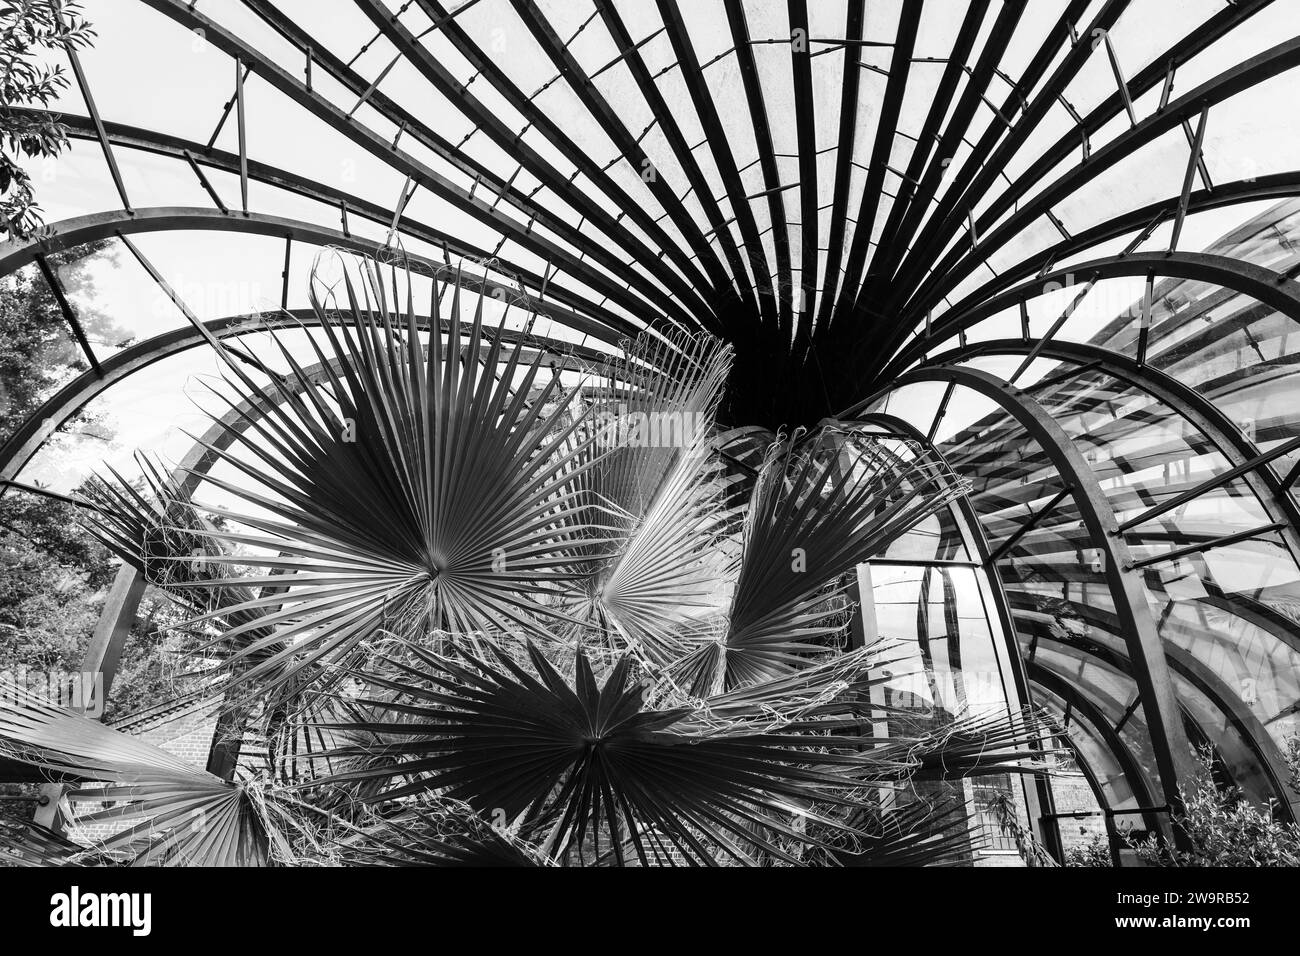 Interior of one of the intertwining cascading glasshouses with a hot and humid tropical climate at Bombay Sapphire, Laverstoke Mill. UK Stock Photo